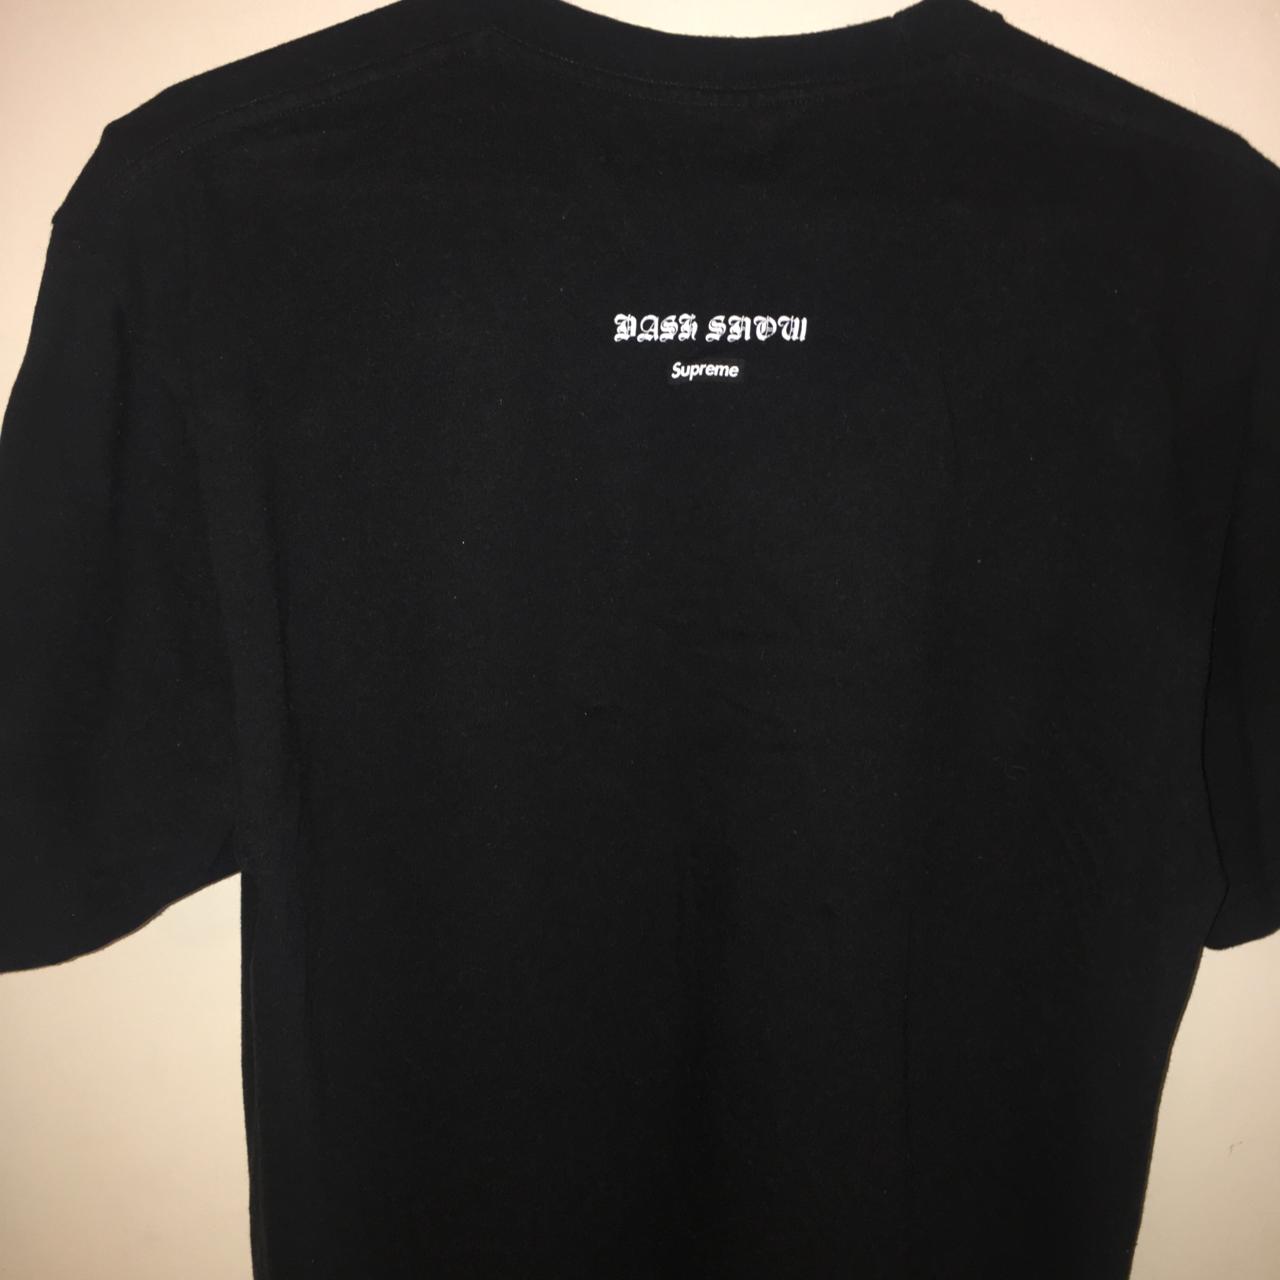 LARGE. Supreme ‘DASH SNOW’ Tee, still in great...